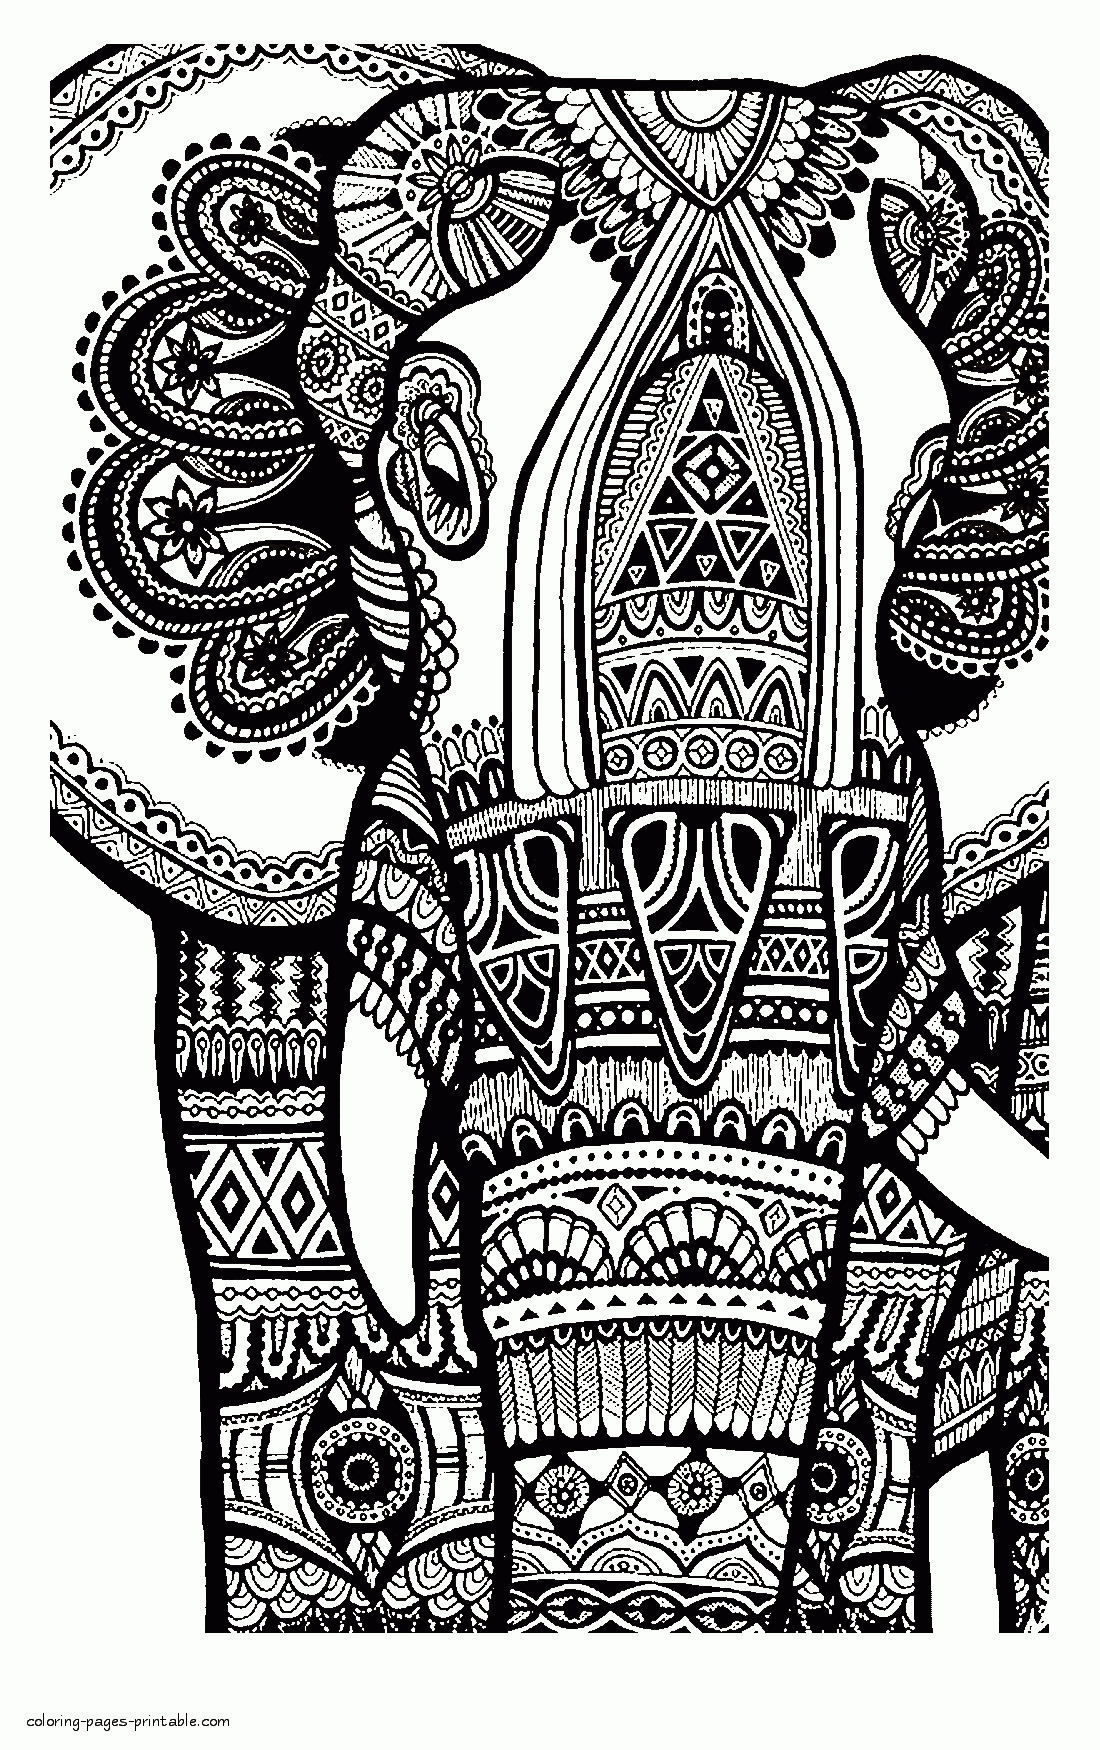 Elephant Coloring Book For Adults || COLORING-PAGES-PRINTABLE.COM